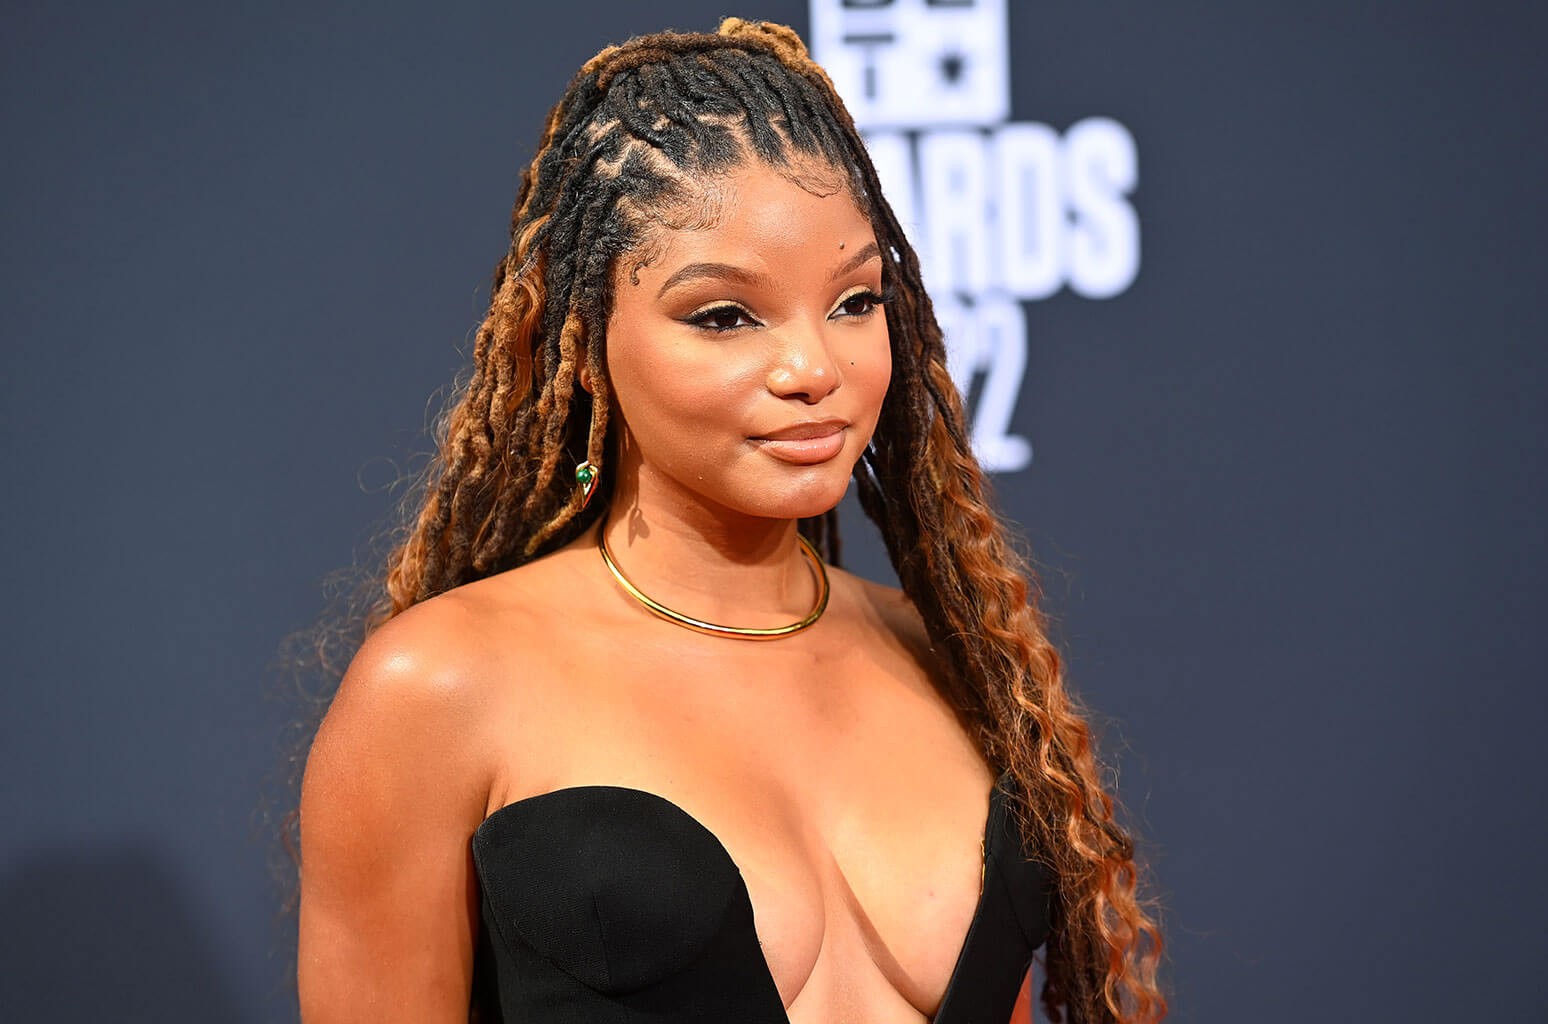 Halle Bailey set the bar high during her audition for Ariel's role